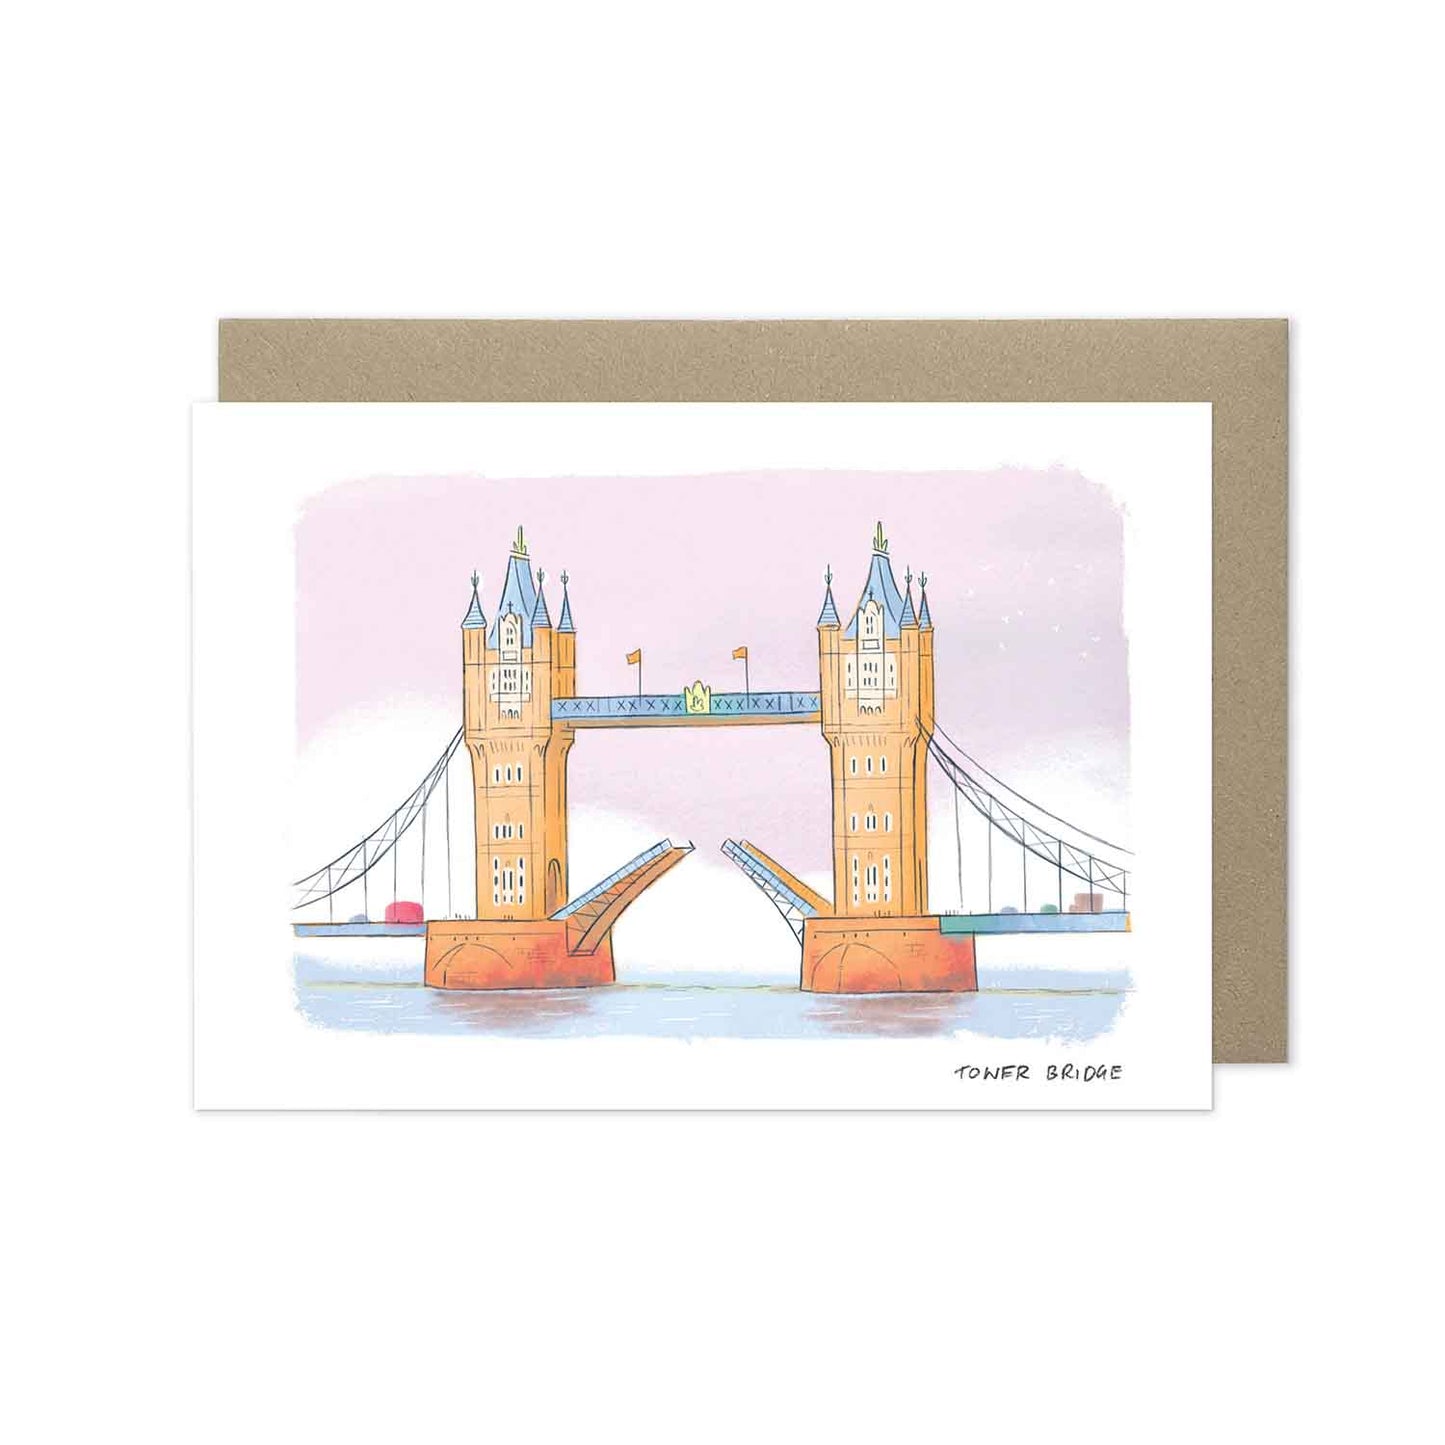 London's Tower Bridge beautifully illustrated on a greeting card from mike green illustration.